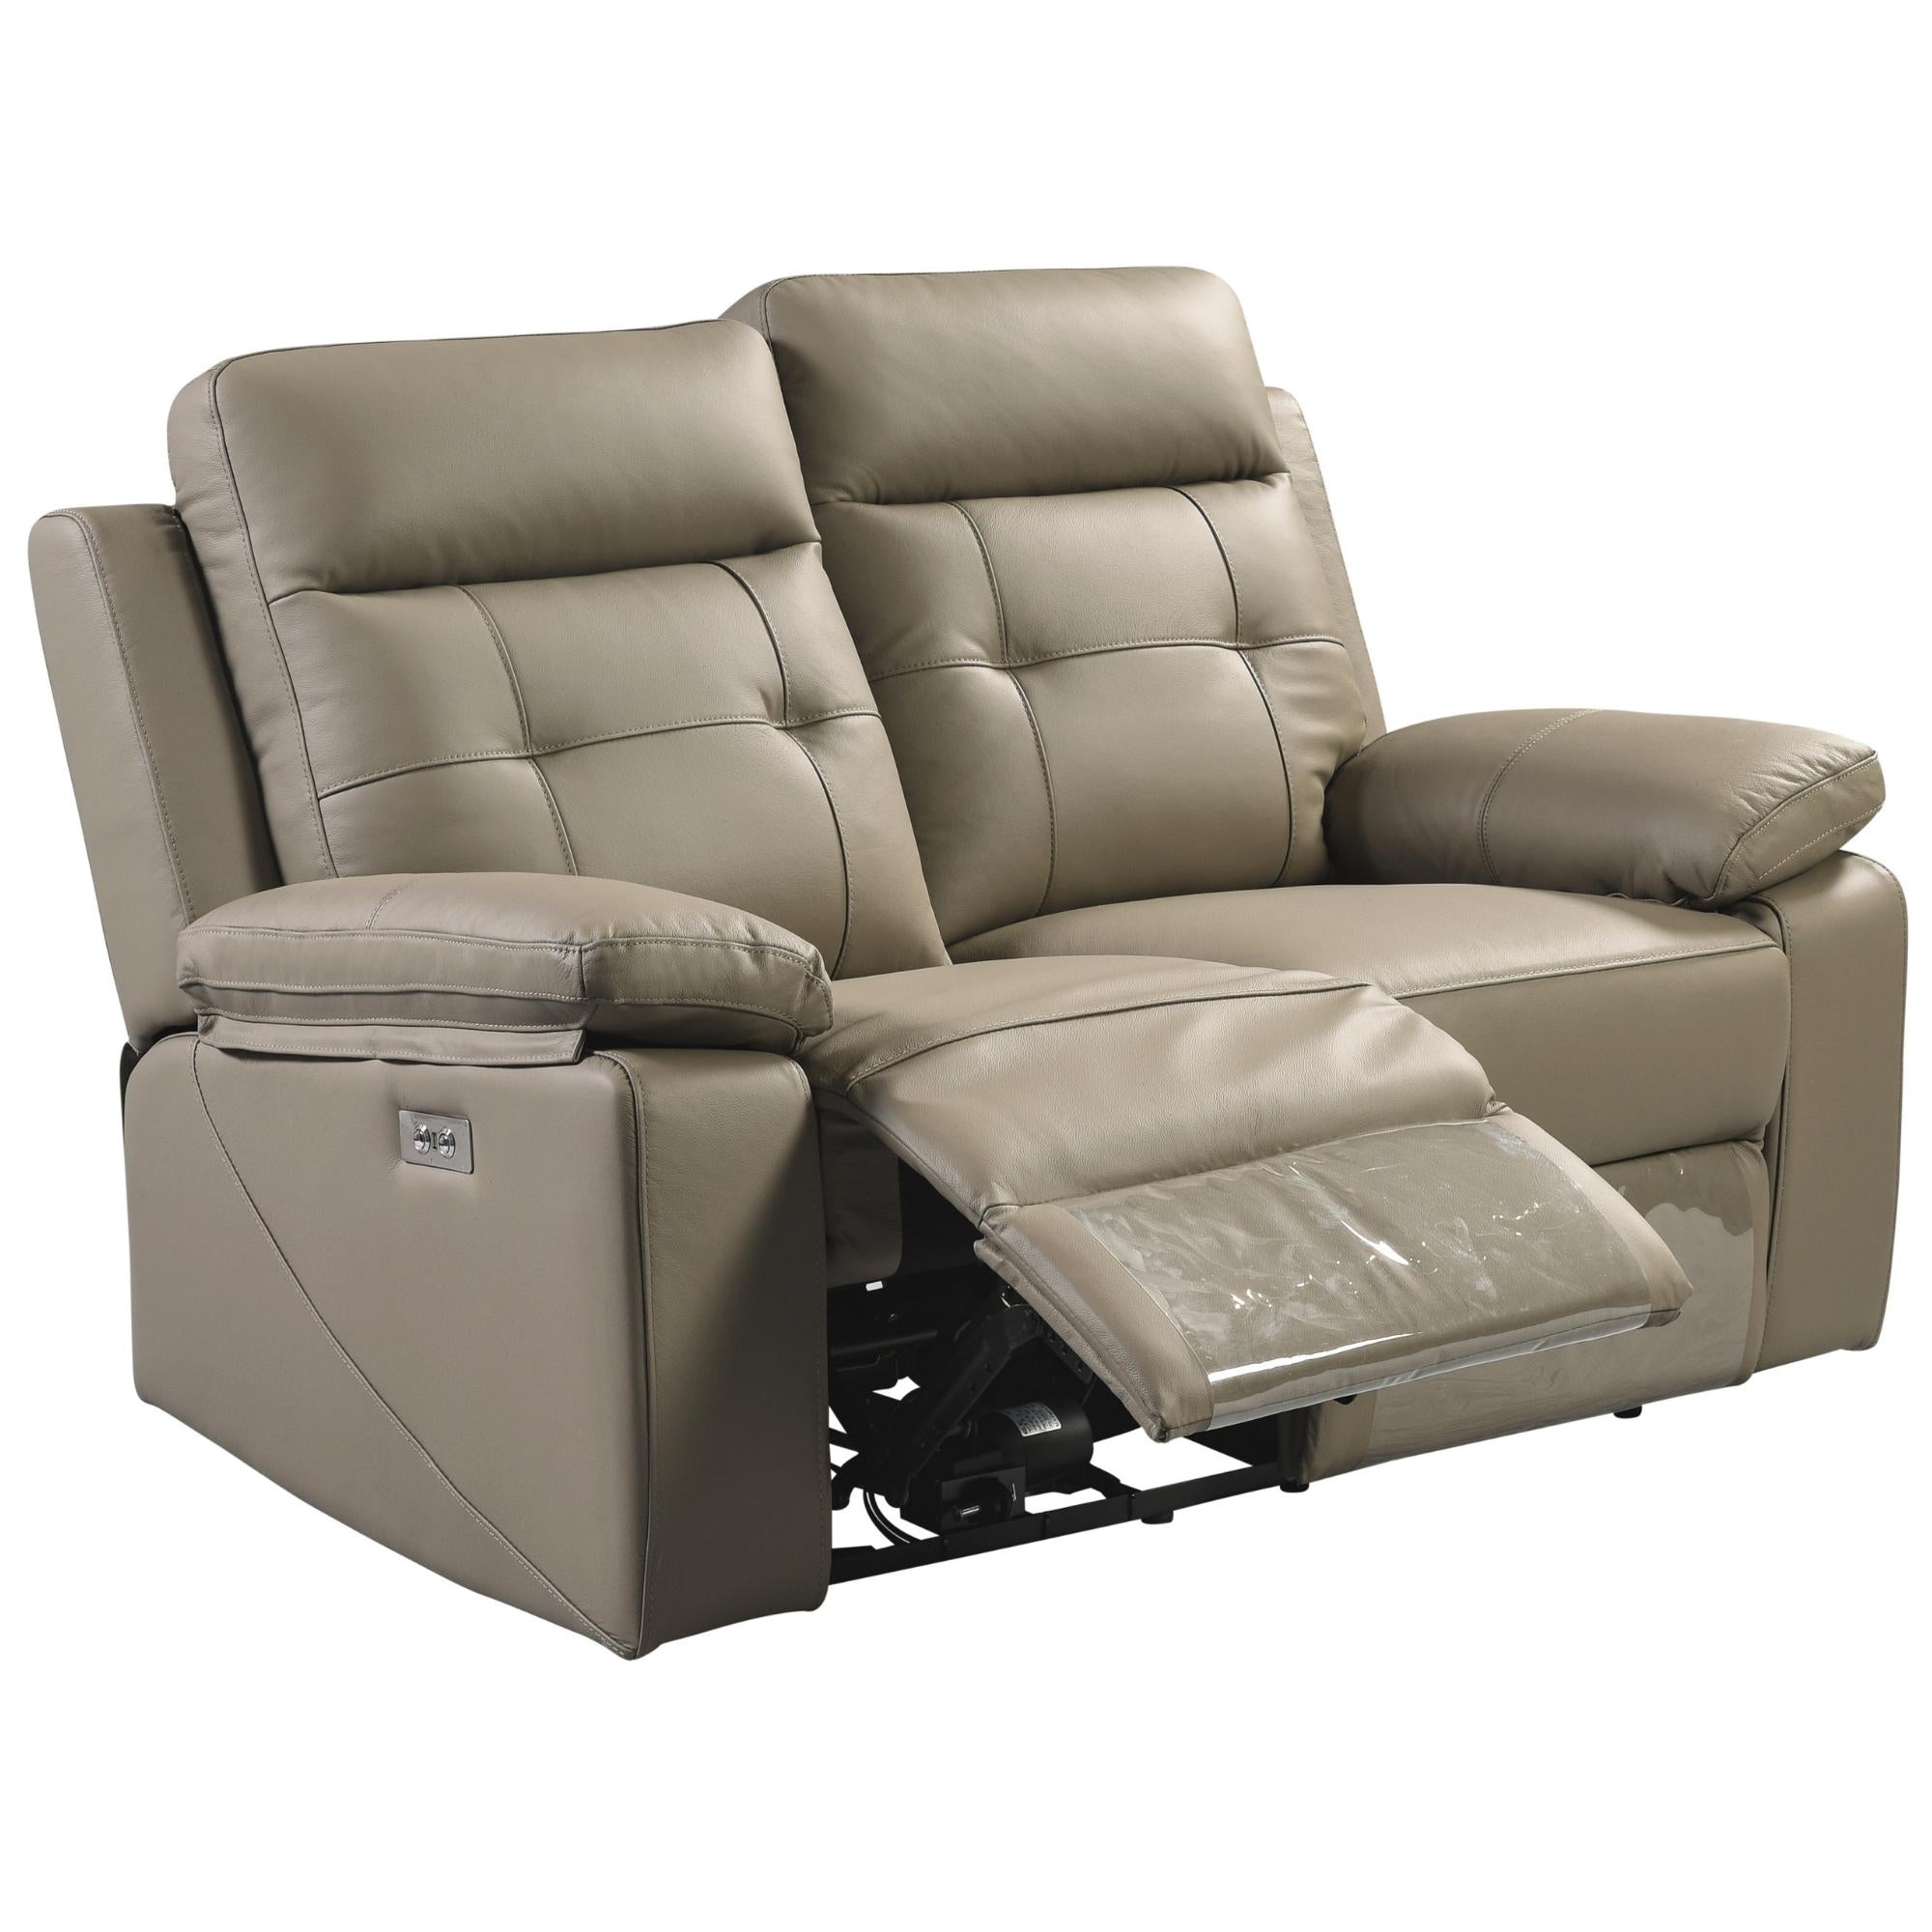 2 + 1 Seater Electric Recliner Sofa Genuine Leather Home Theater Lounge